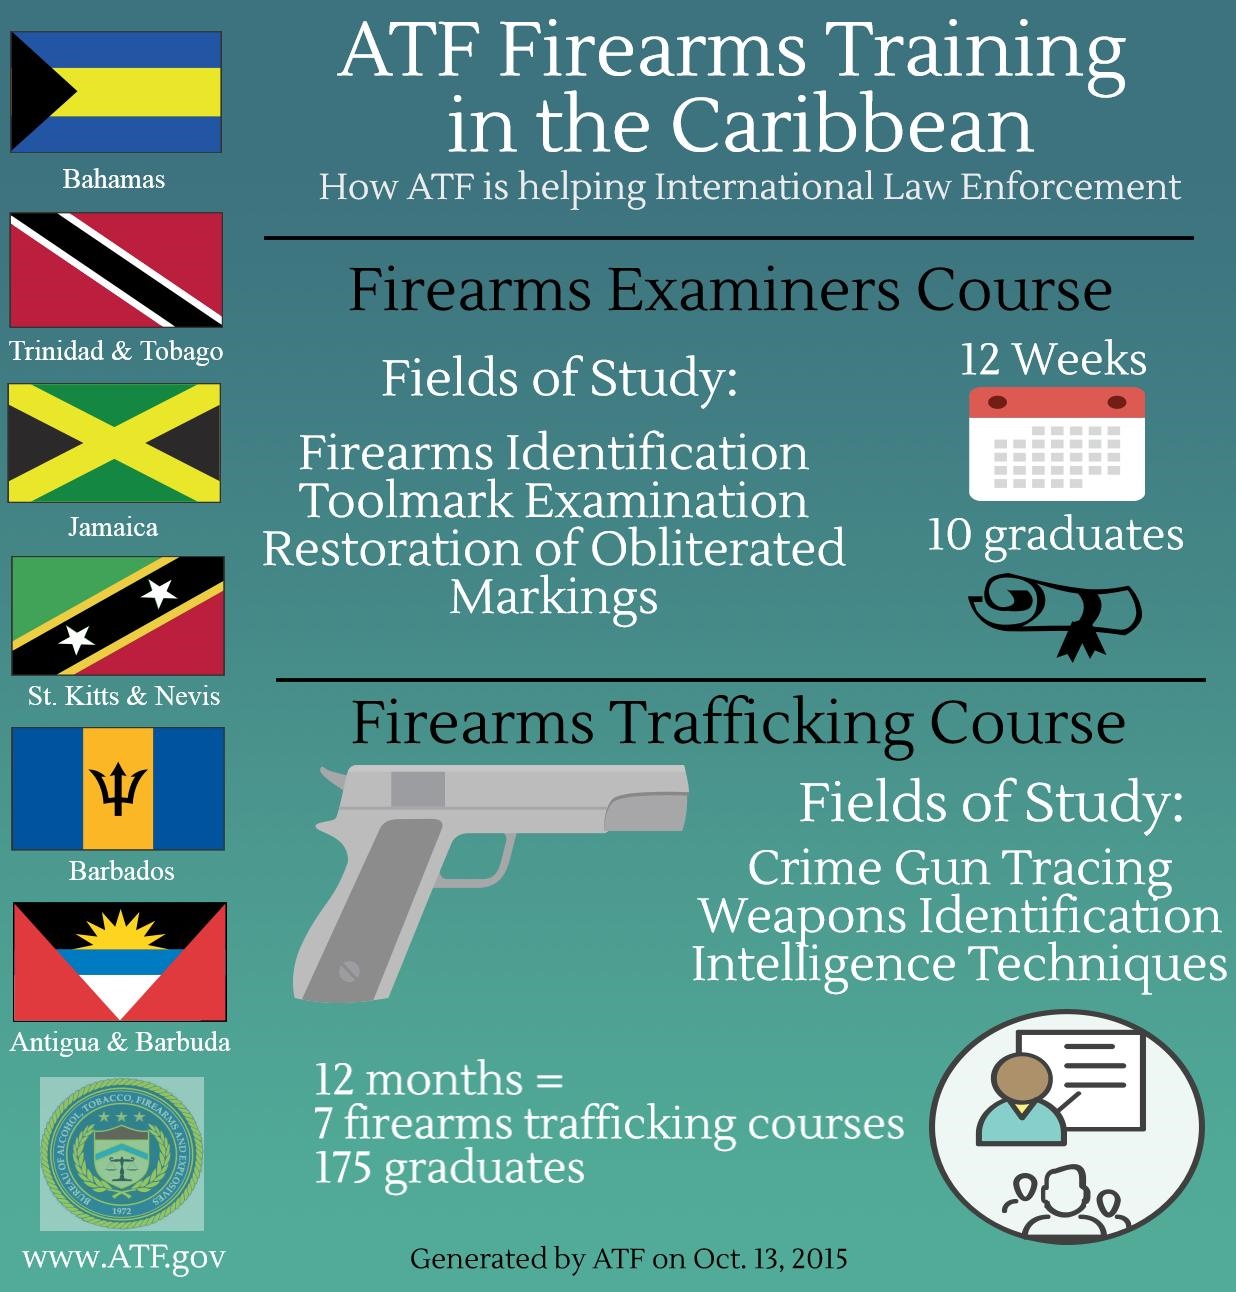 Firearms Trafficking Training in the Caribbean Image